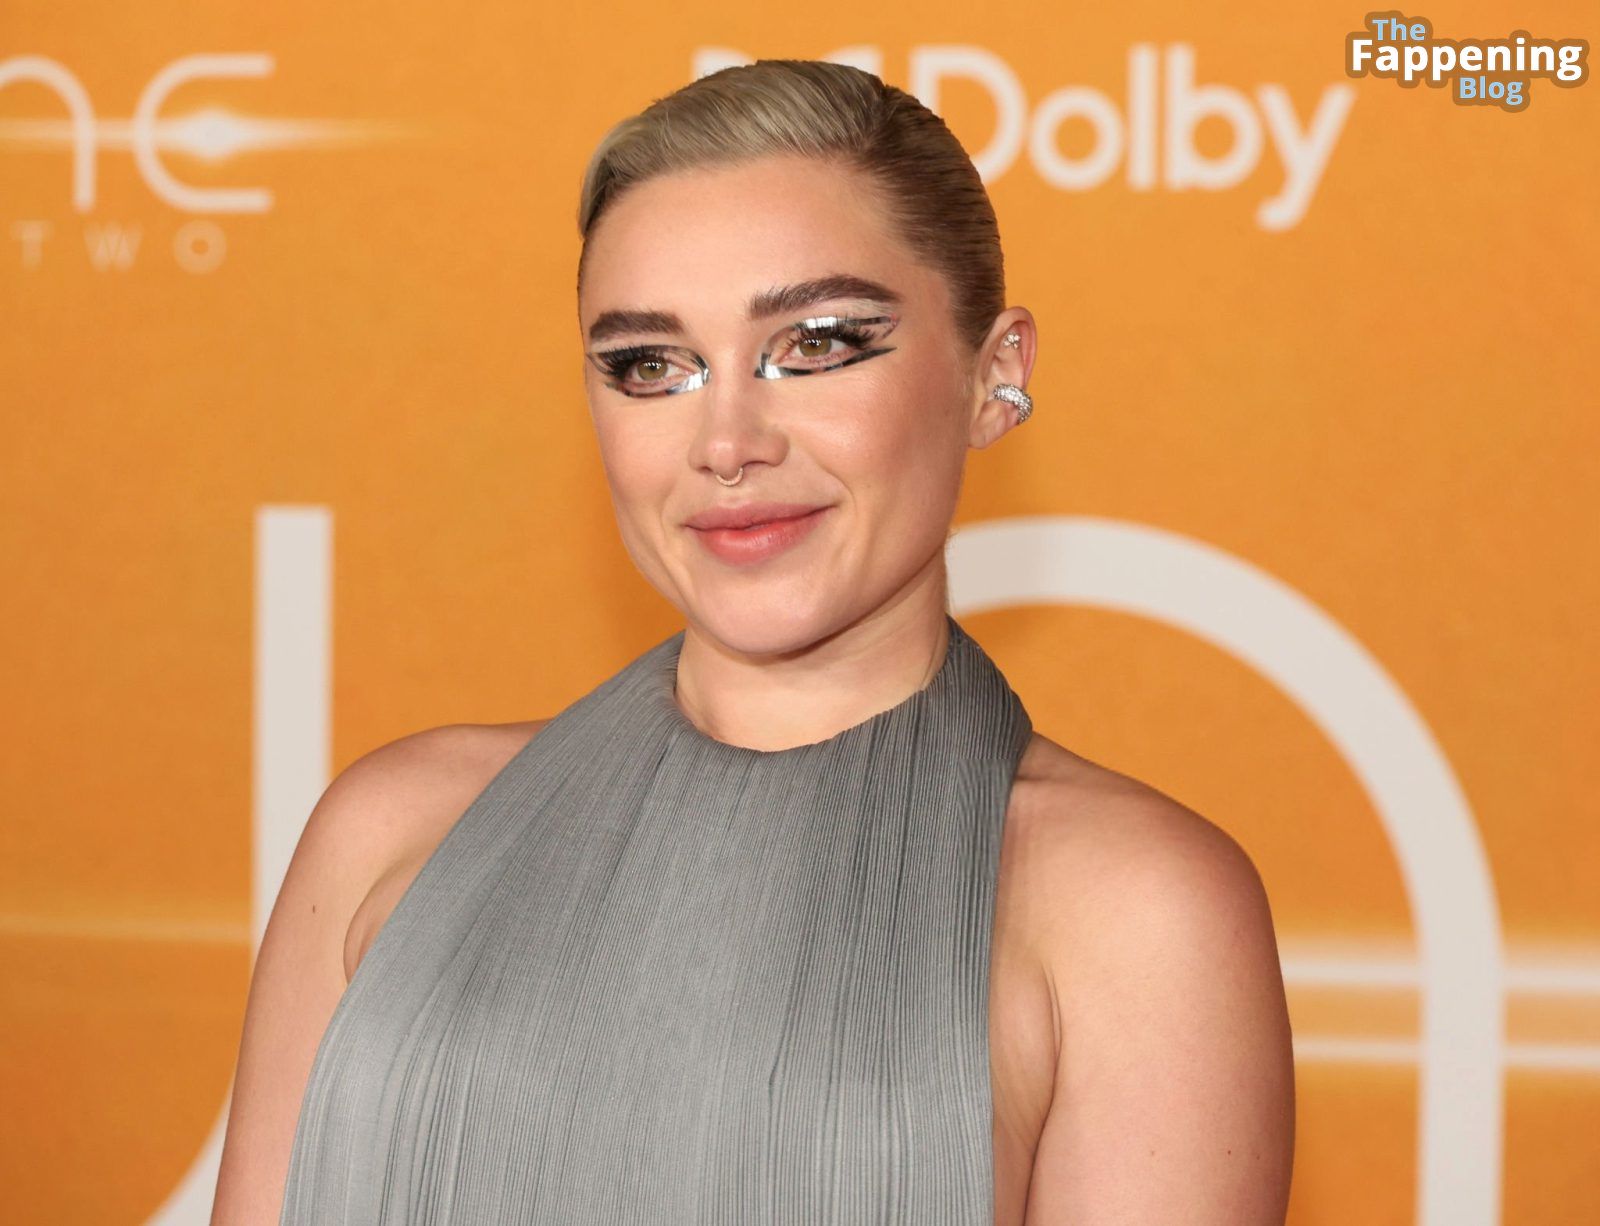 florence-pugh-braless-side-boobs-dune-part-two-premiere-nyc-4-thefappeningblog.com_.jpg